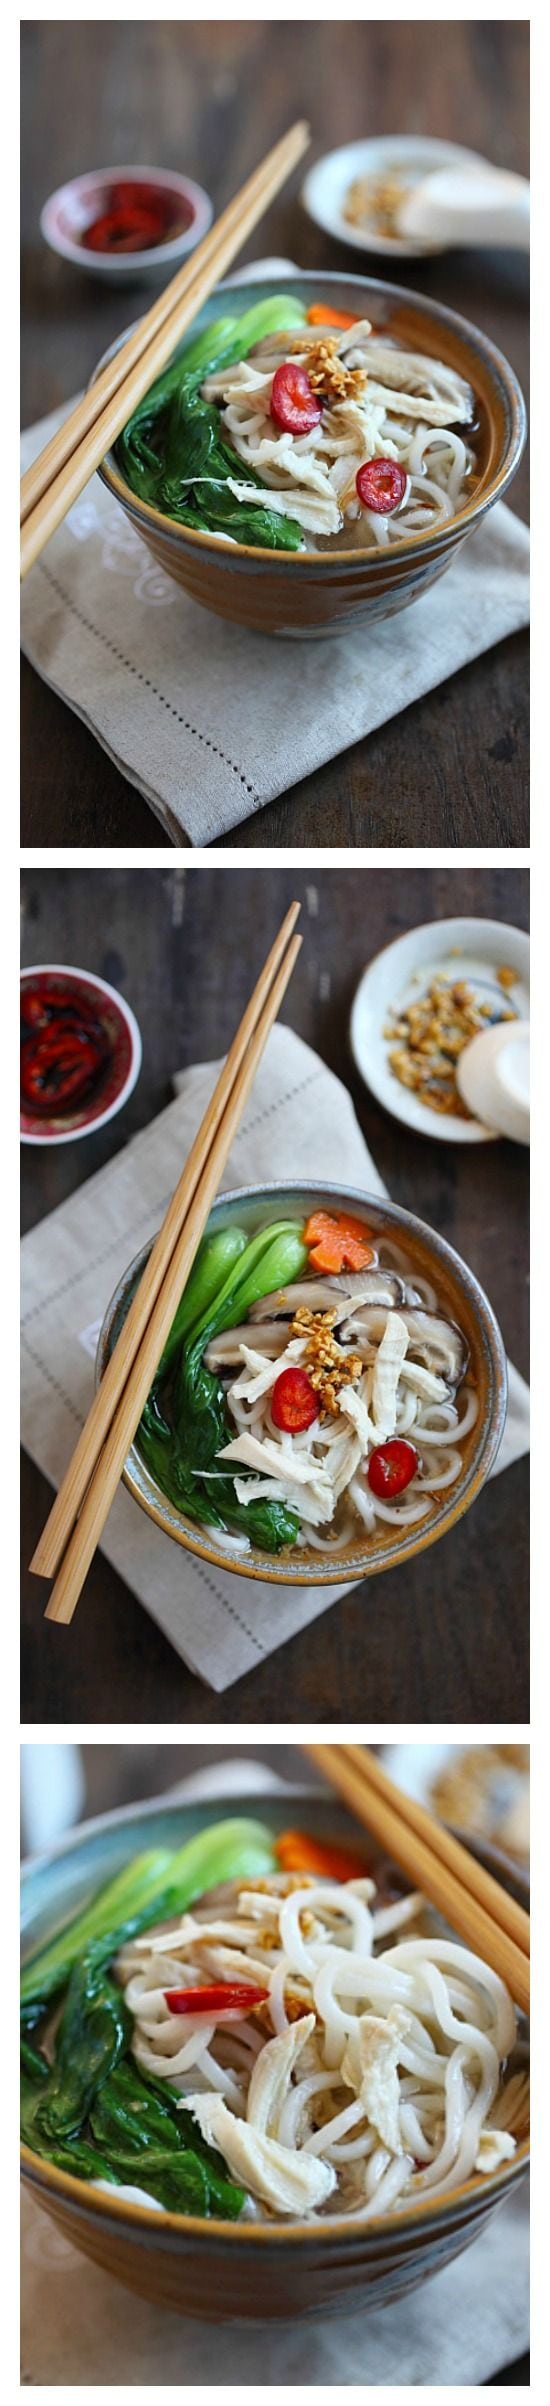 Chinese Chicken Noodle Soup - easy noodle soup with chicken broth, noodles and bok choy. This recipe is so easy and comforting, perfect as a quick and hearty lunch | rasamalaysia.com